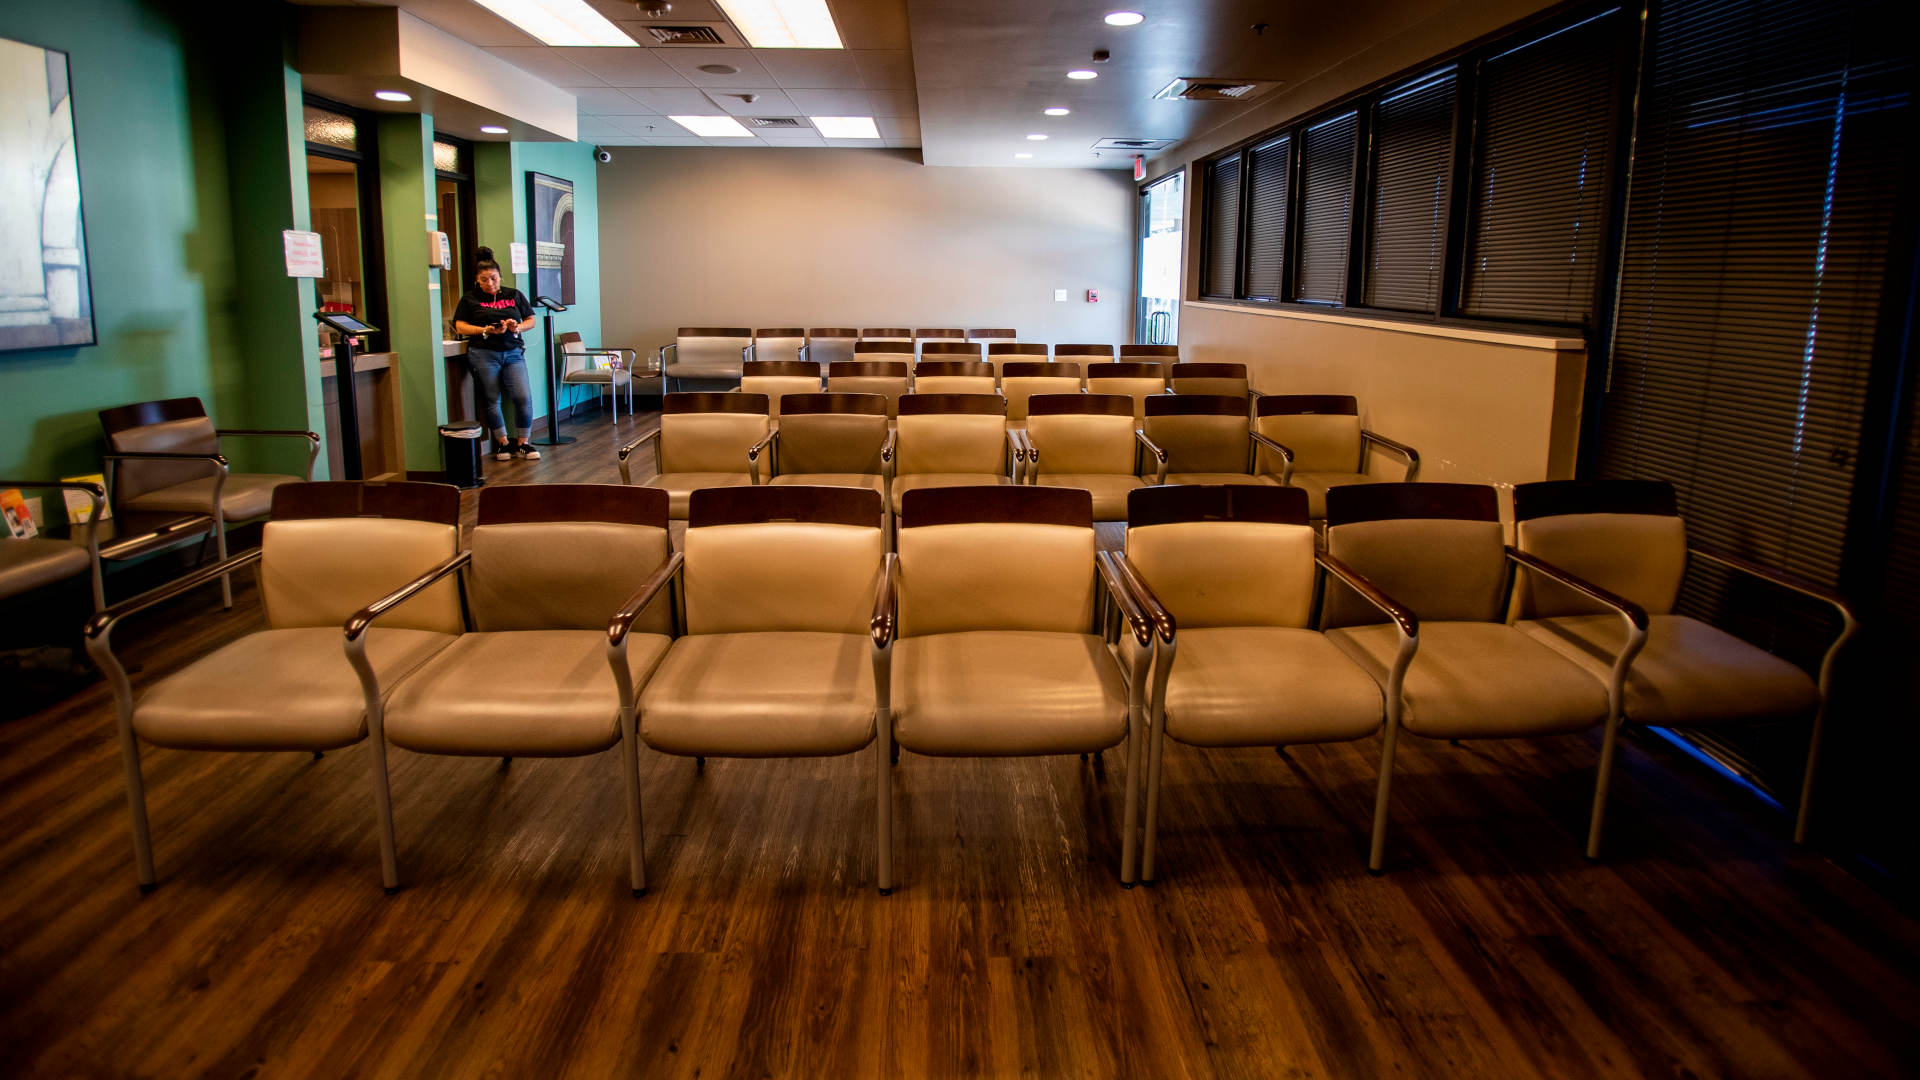 In San Antonio, Texas, the waiting room at Alamo Women's Reproductive Services is empty just before the Supreme Court overturned Roe v. Wade on June 24, 2022.